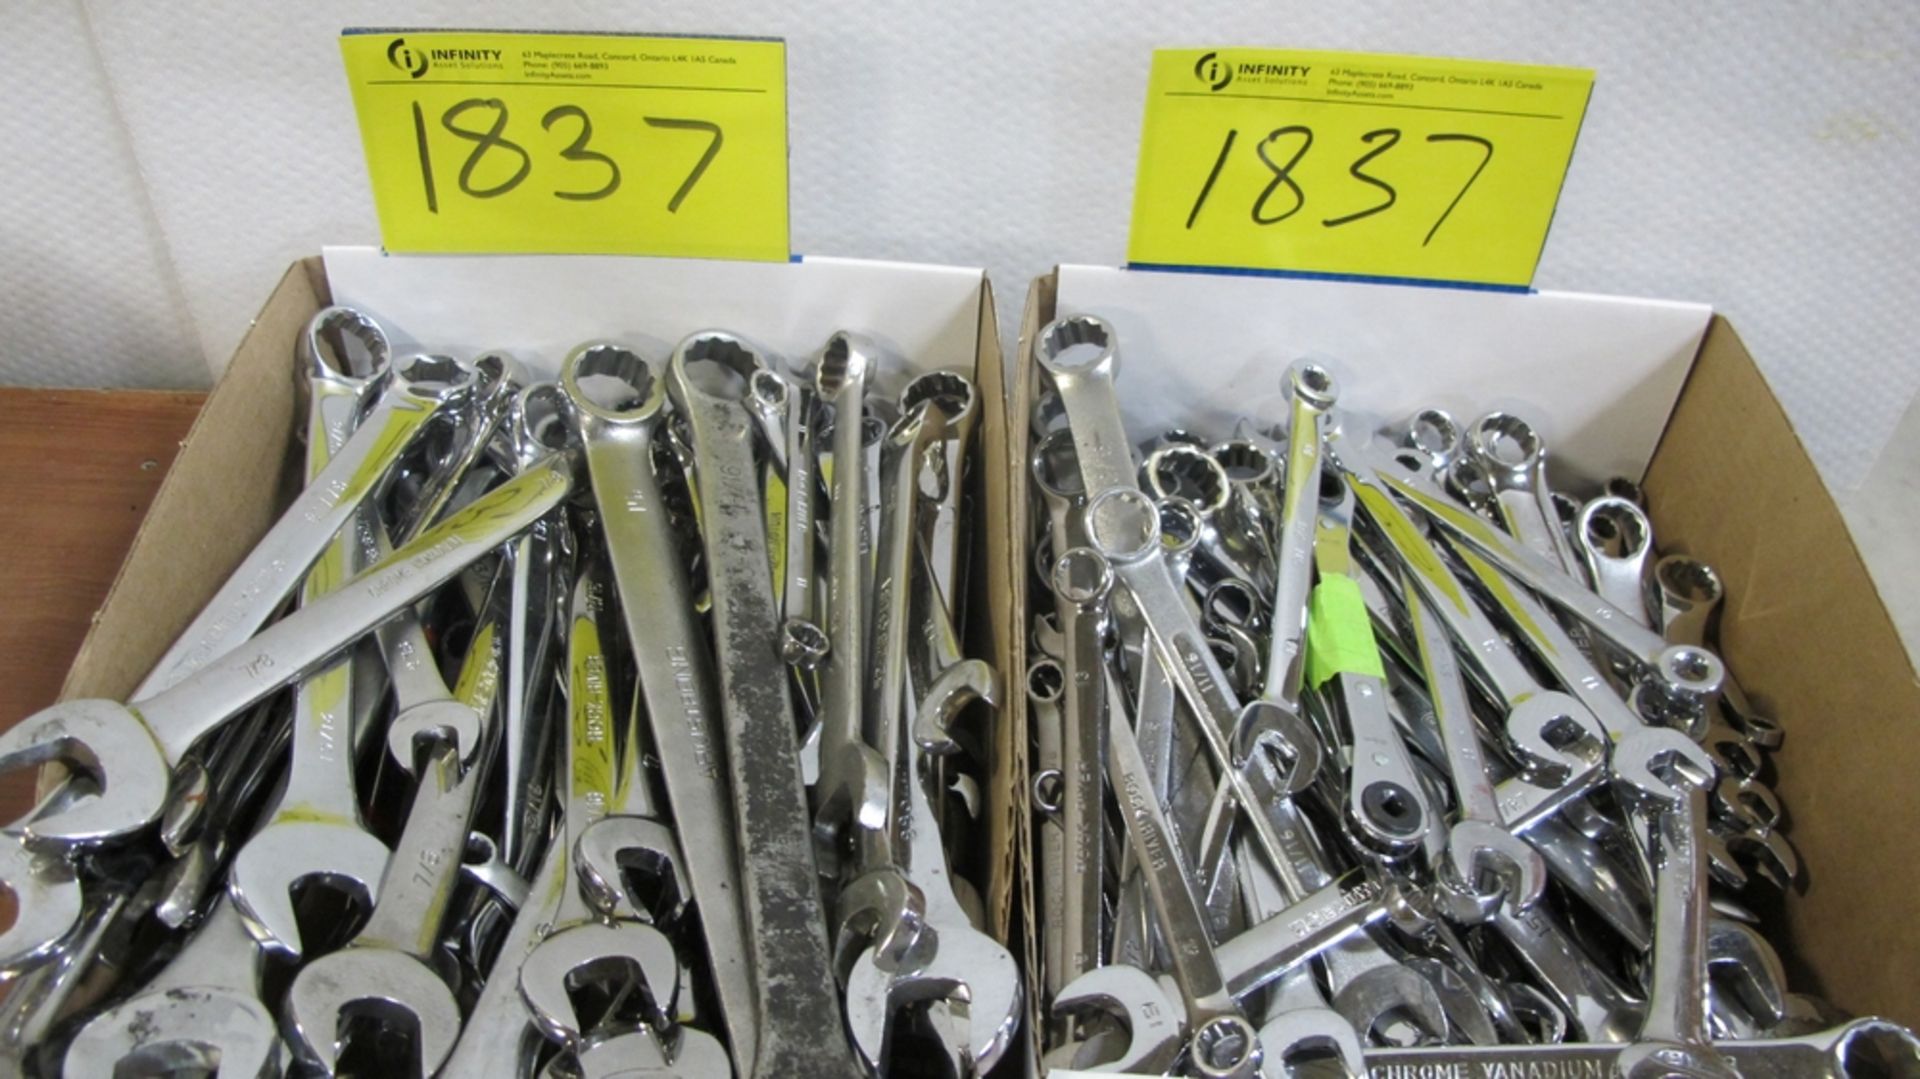 LOT OF 2 WRENCHES (100 SHIRLEY AVE KITCHENER)